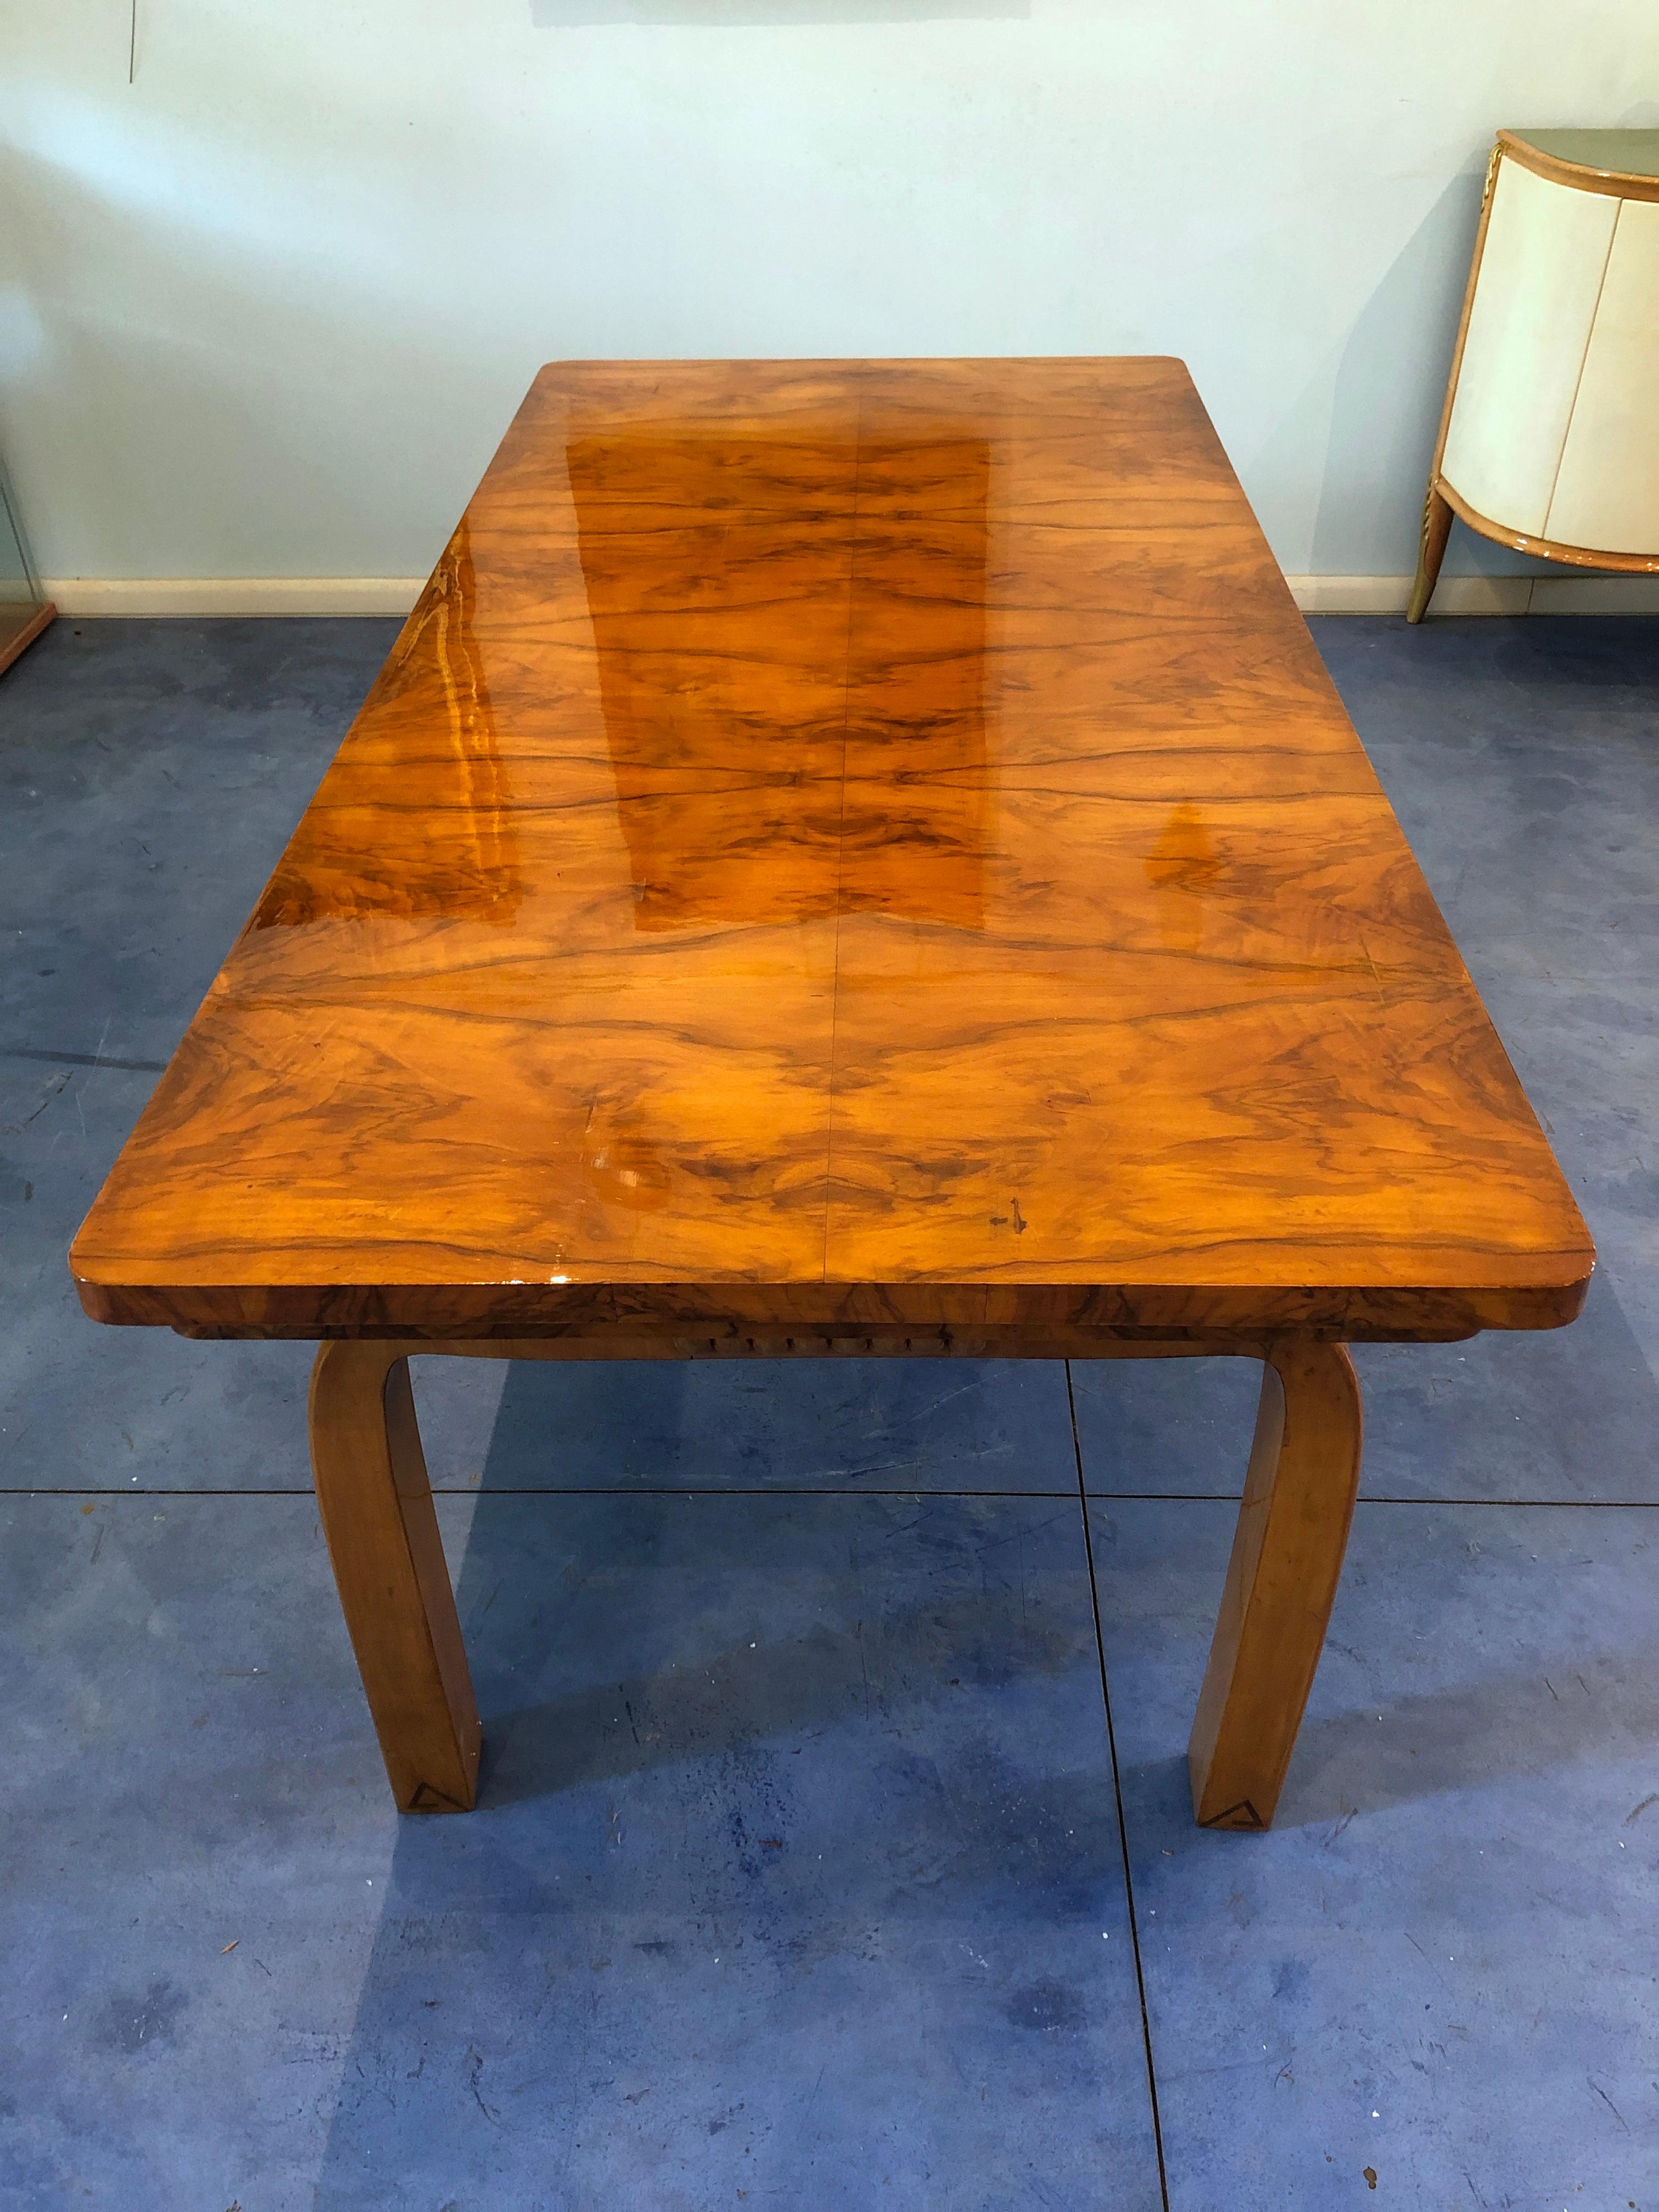 Beautiful Italian Art Deco dining table, with walnut tabletop and maple legs.
Wonderful rationalist line.